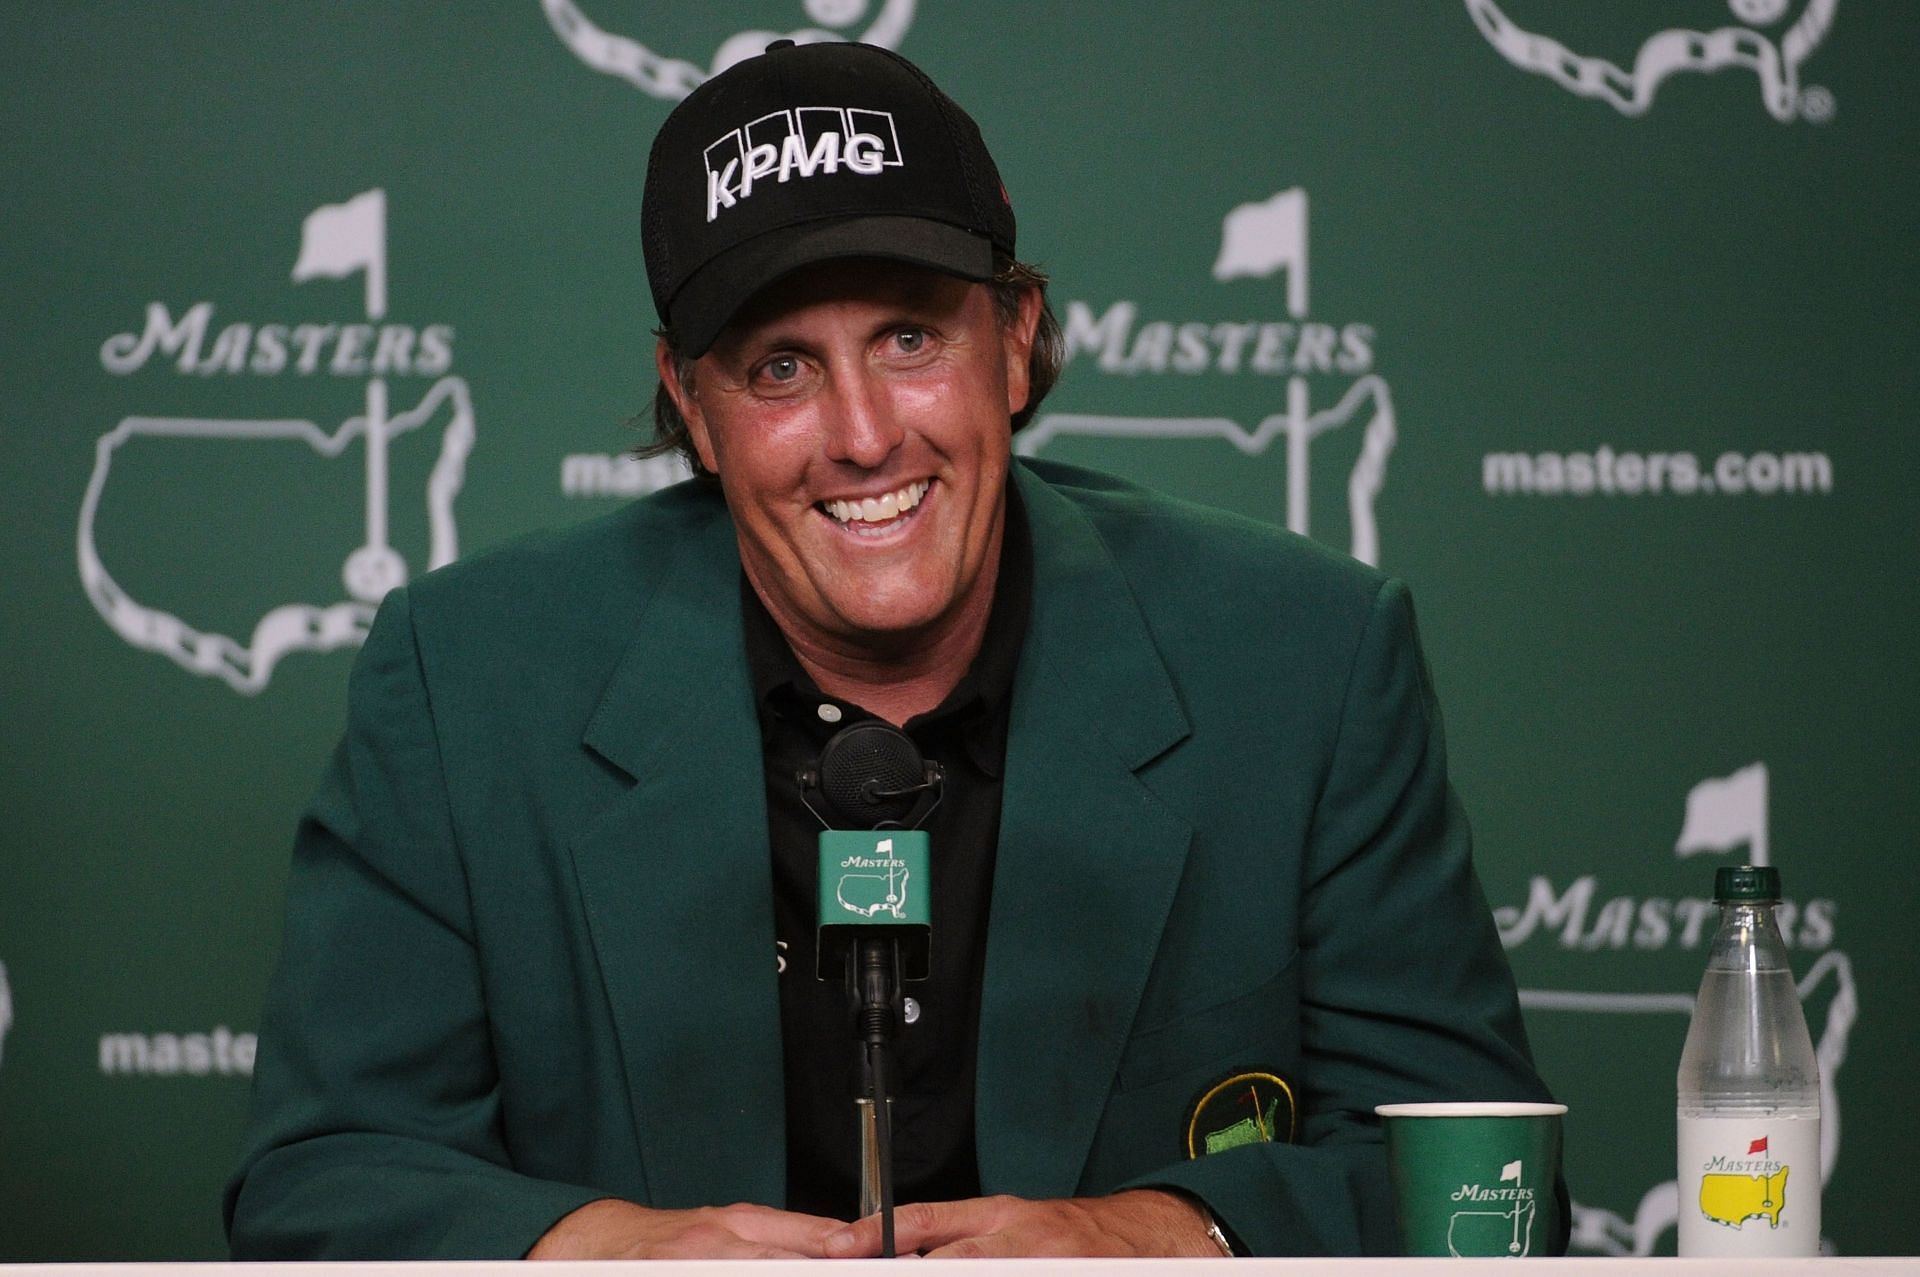 Phil Mickelson&#039;s most recent win at The Masters came in 2010